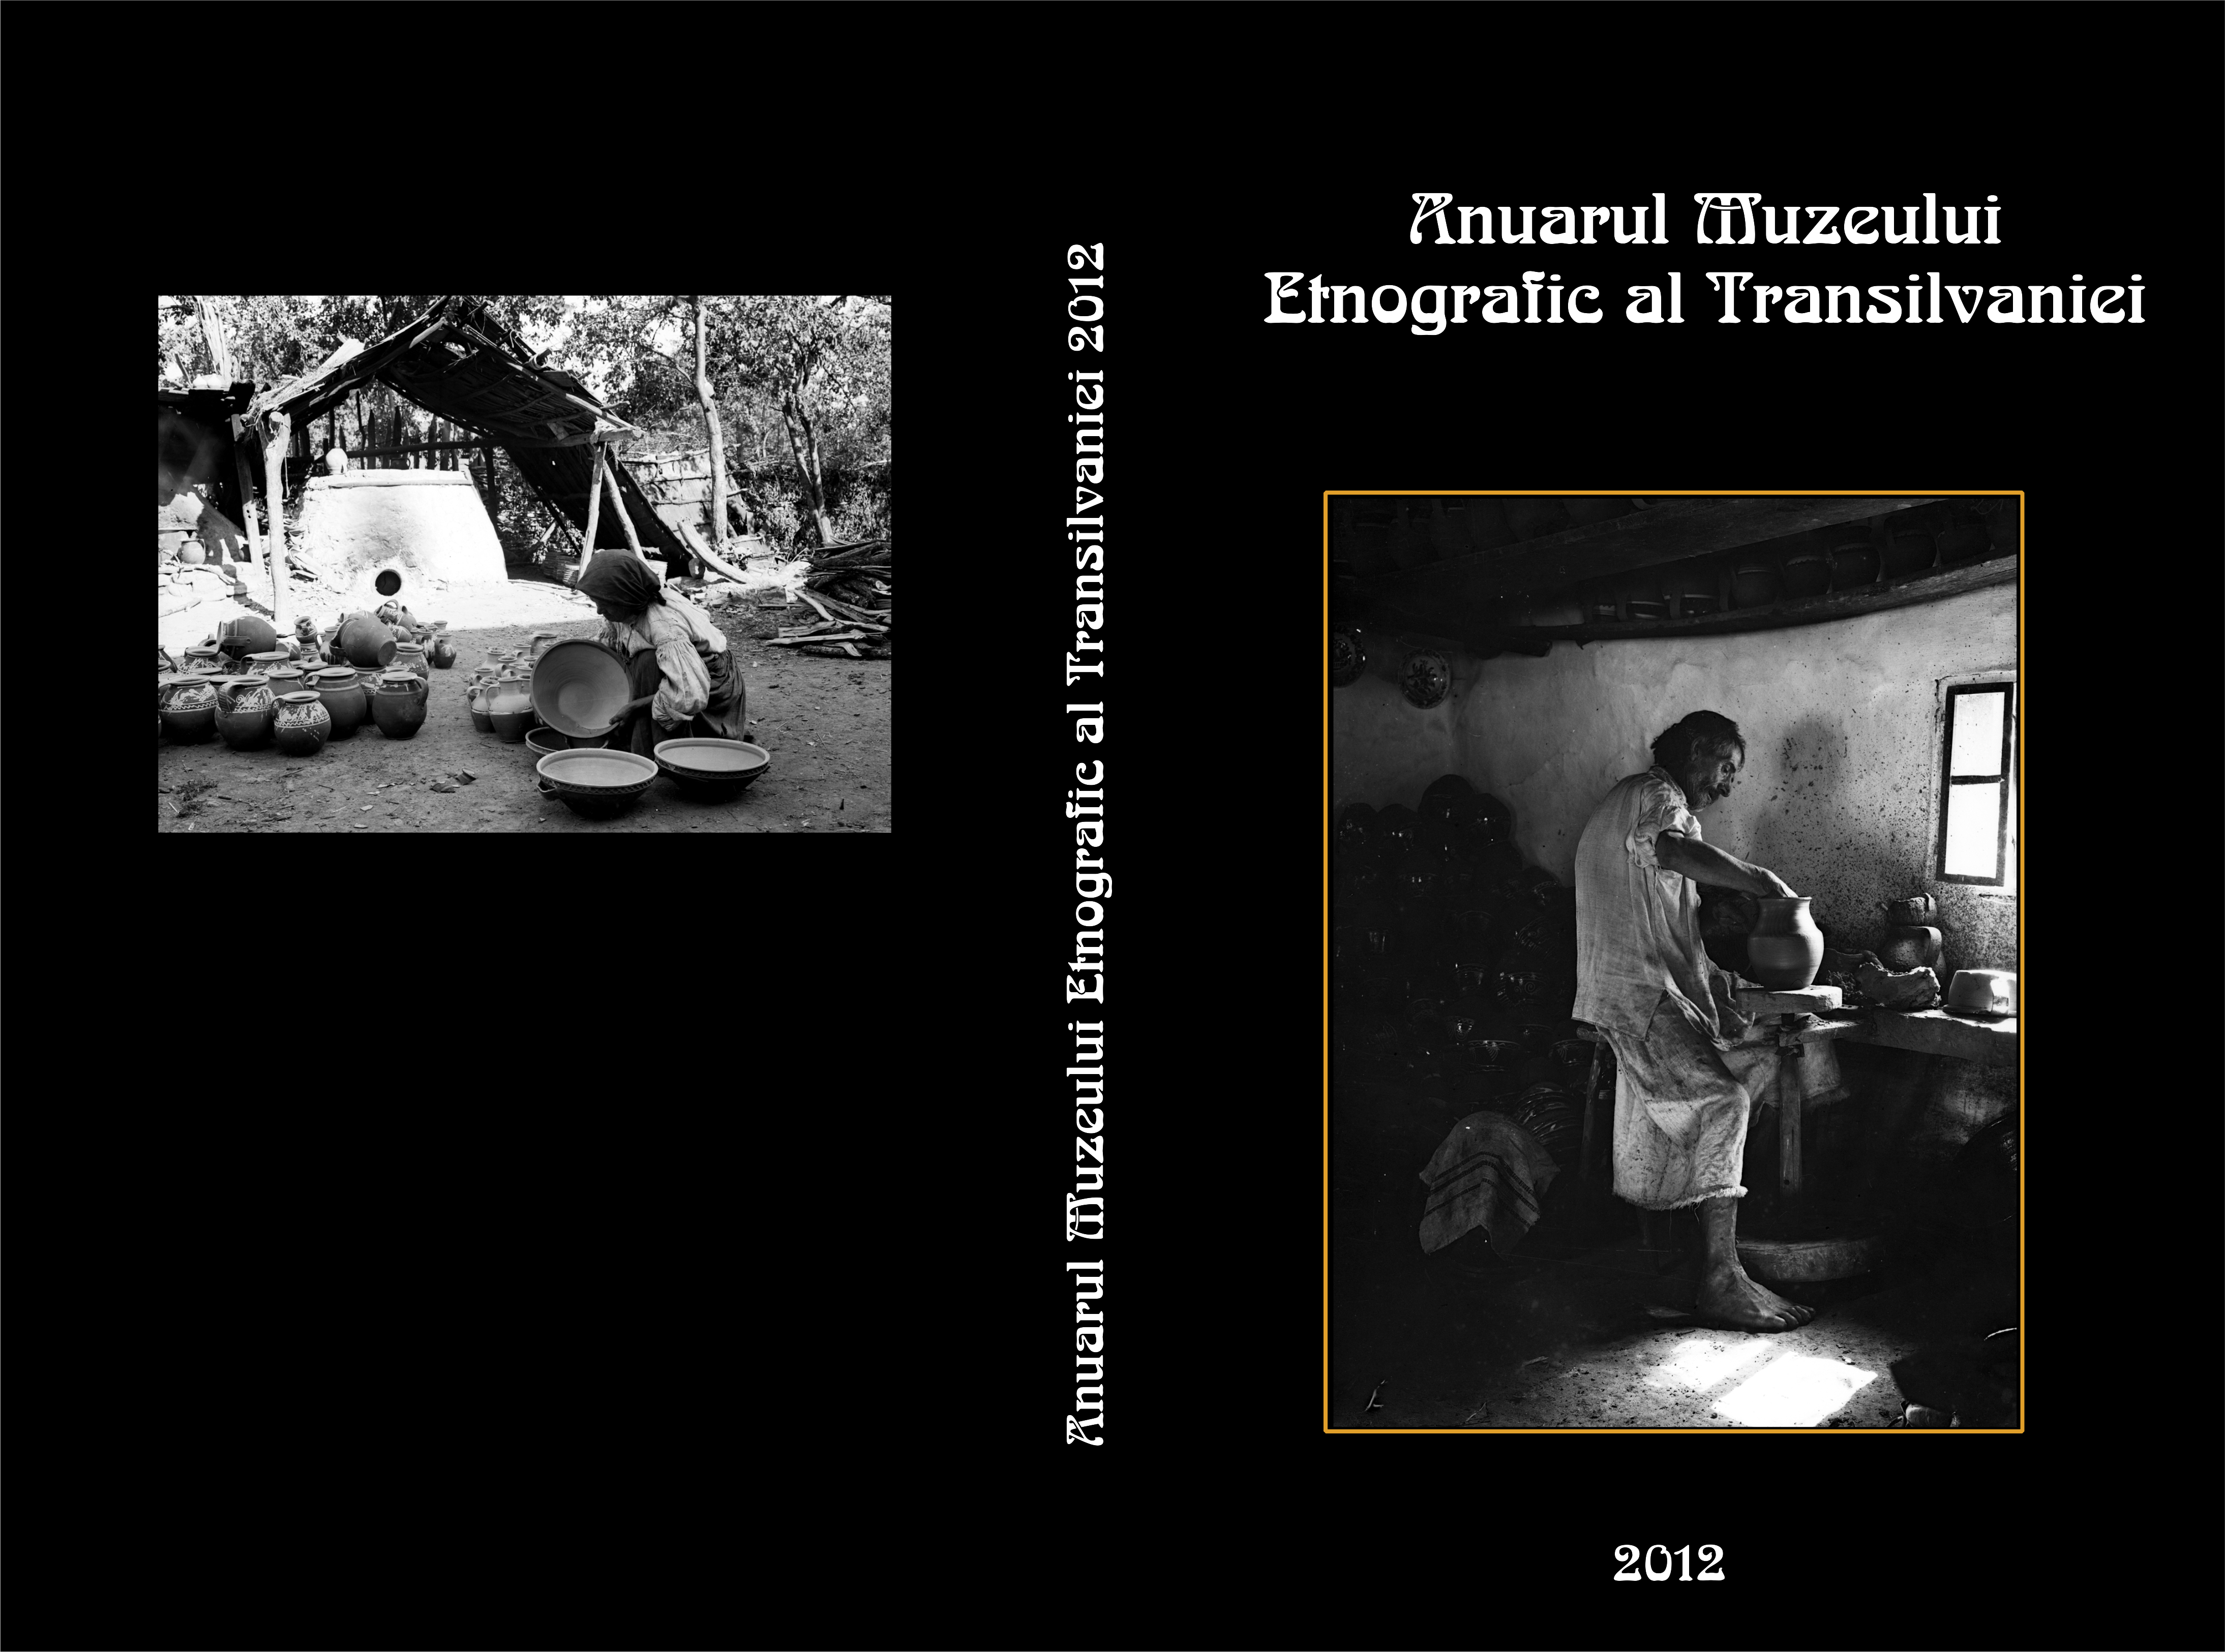 Forms and Significances of a Choreographic Post-Funeral Ritual in the Danube Valley : Hora de pomana Cover Image